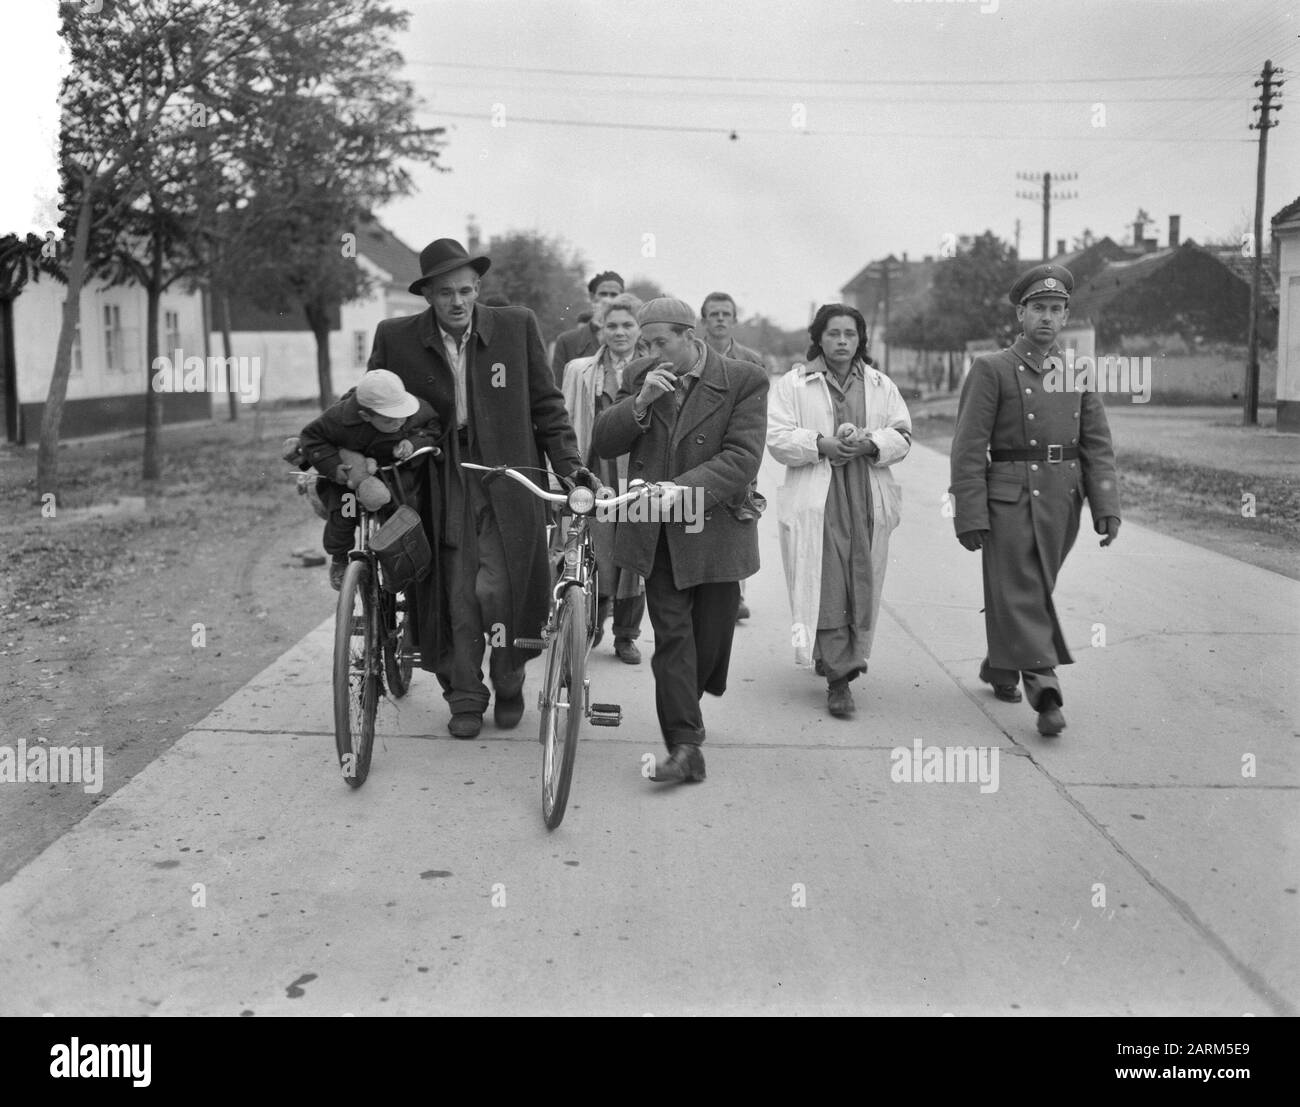 Groups with bicycles and children at border Date: 31 October 1956 Location: Nickelsdorf Keywords: BIKLES, GROUPS, Children Stock Photo